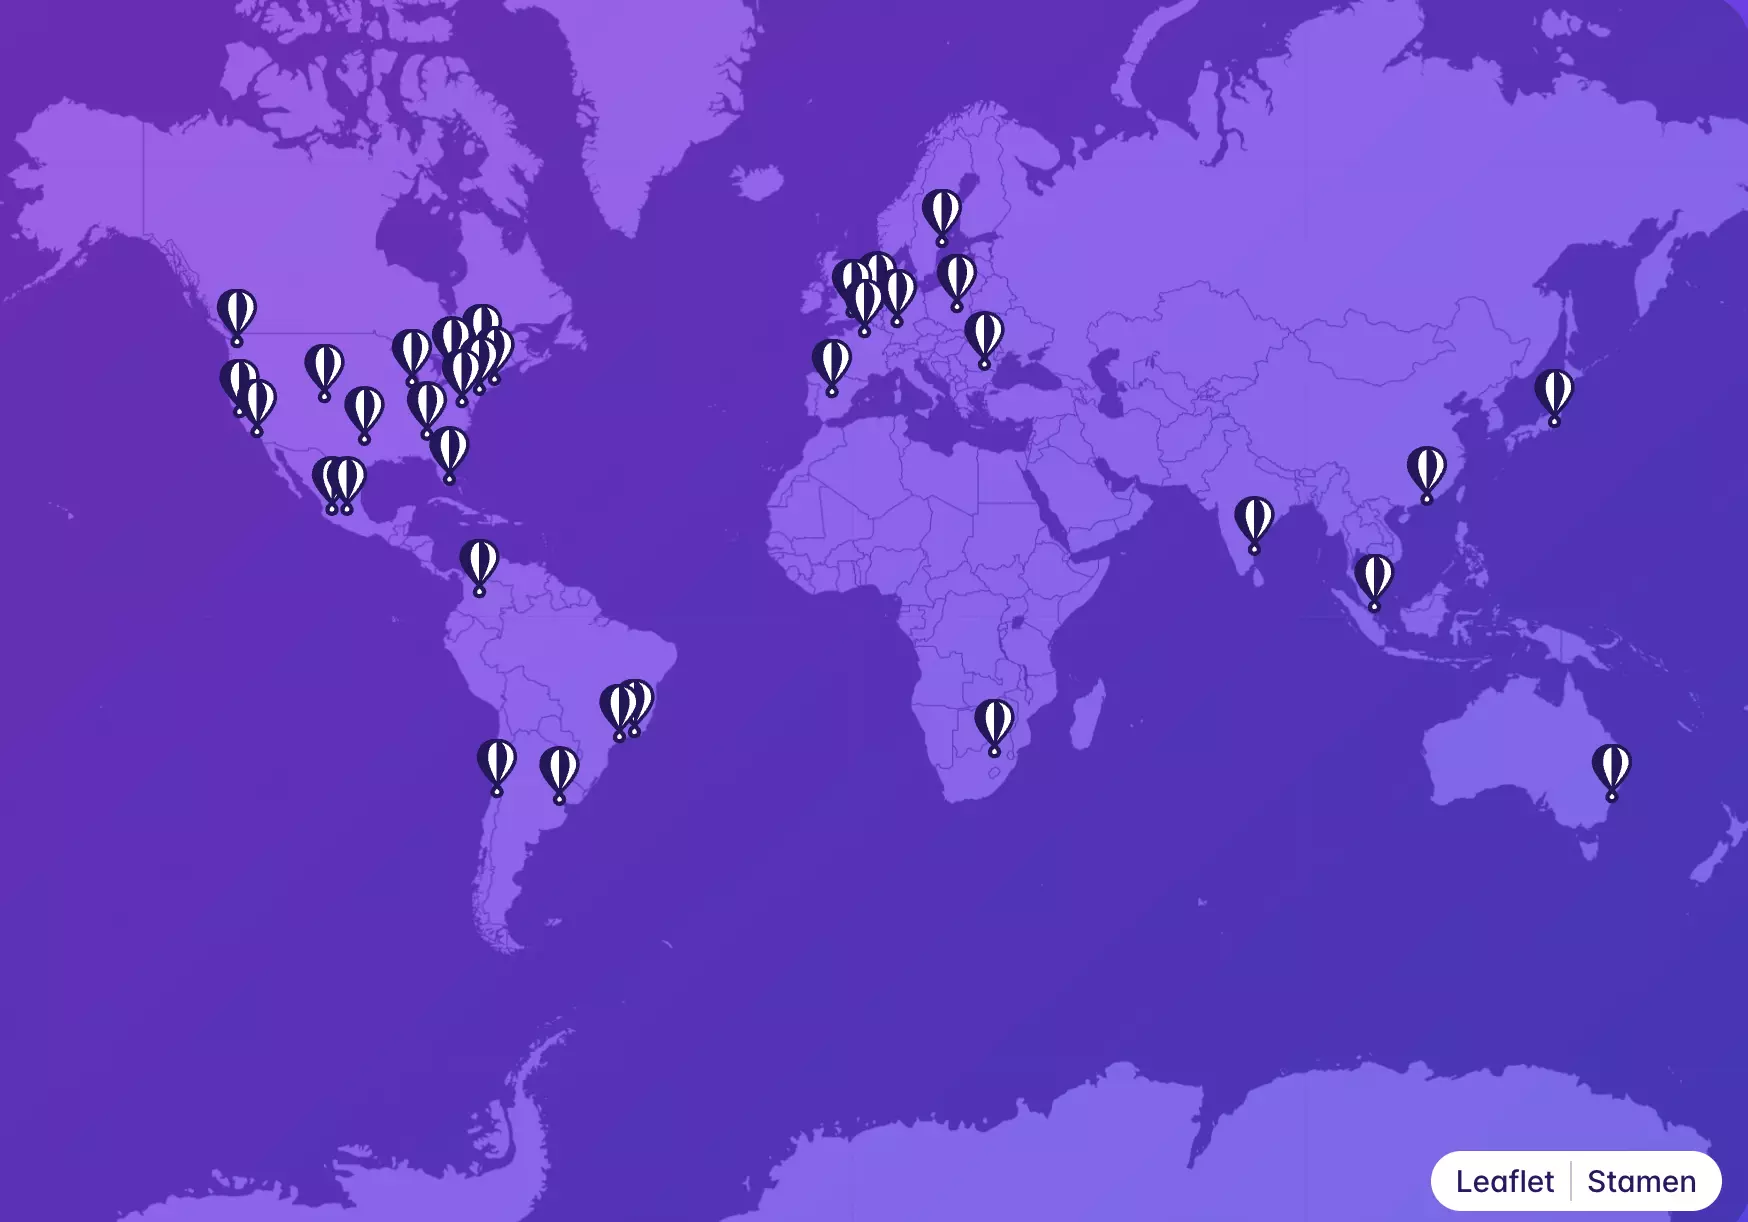 Map showing the Fly.io balloon in 34 locations across a world map